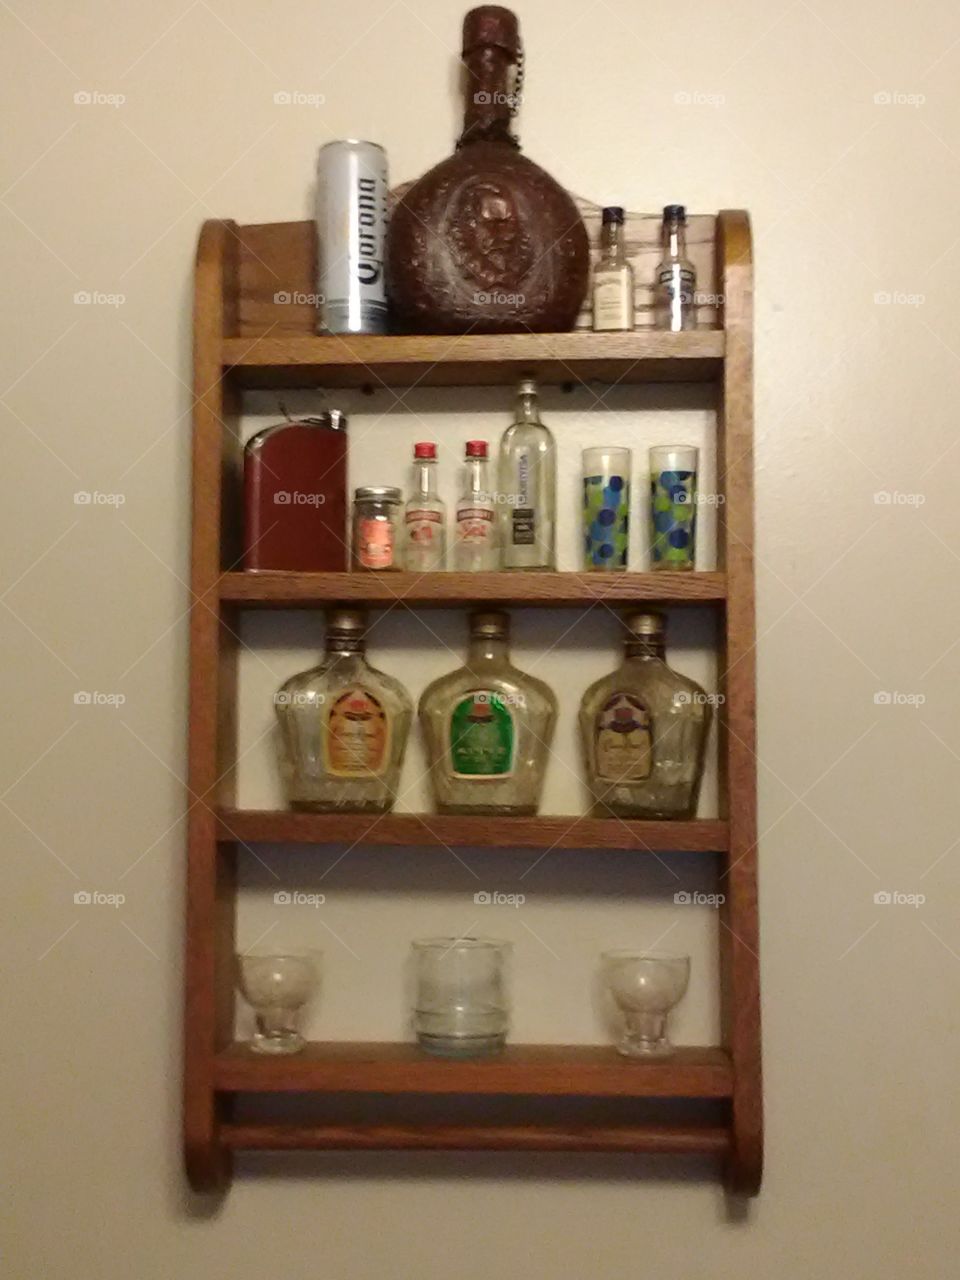 collection of alcoholic beverage bottles he he..